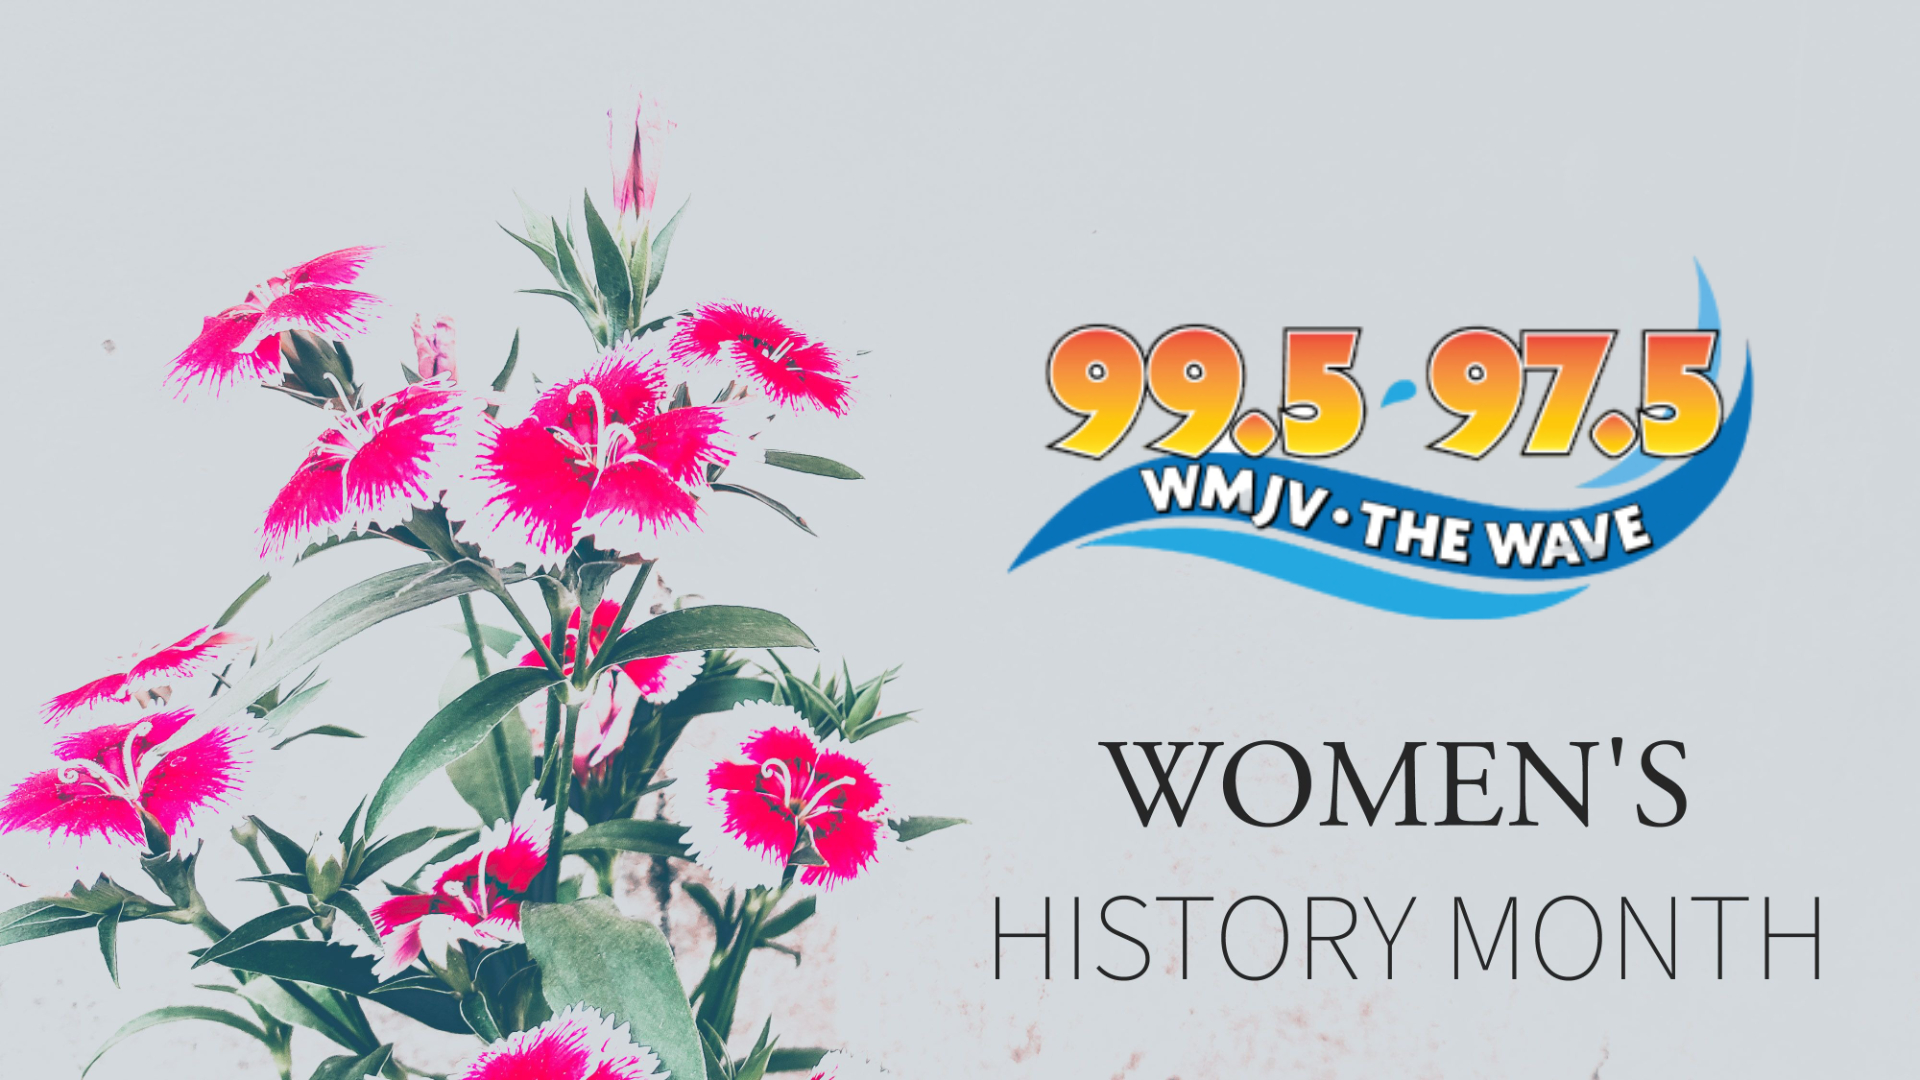 THE WAVE CELEBRATES WOMENS HISTORY MONTH!